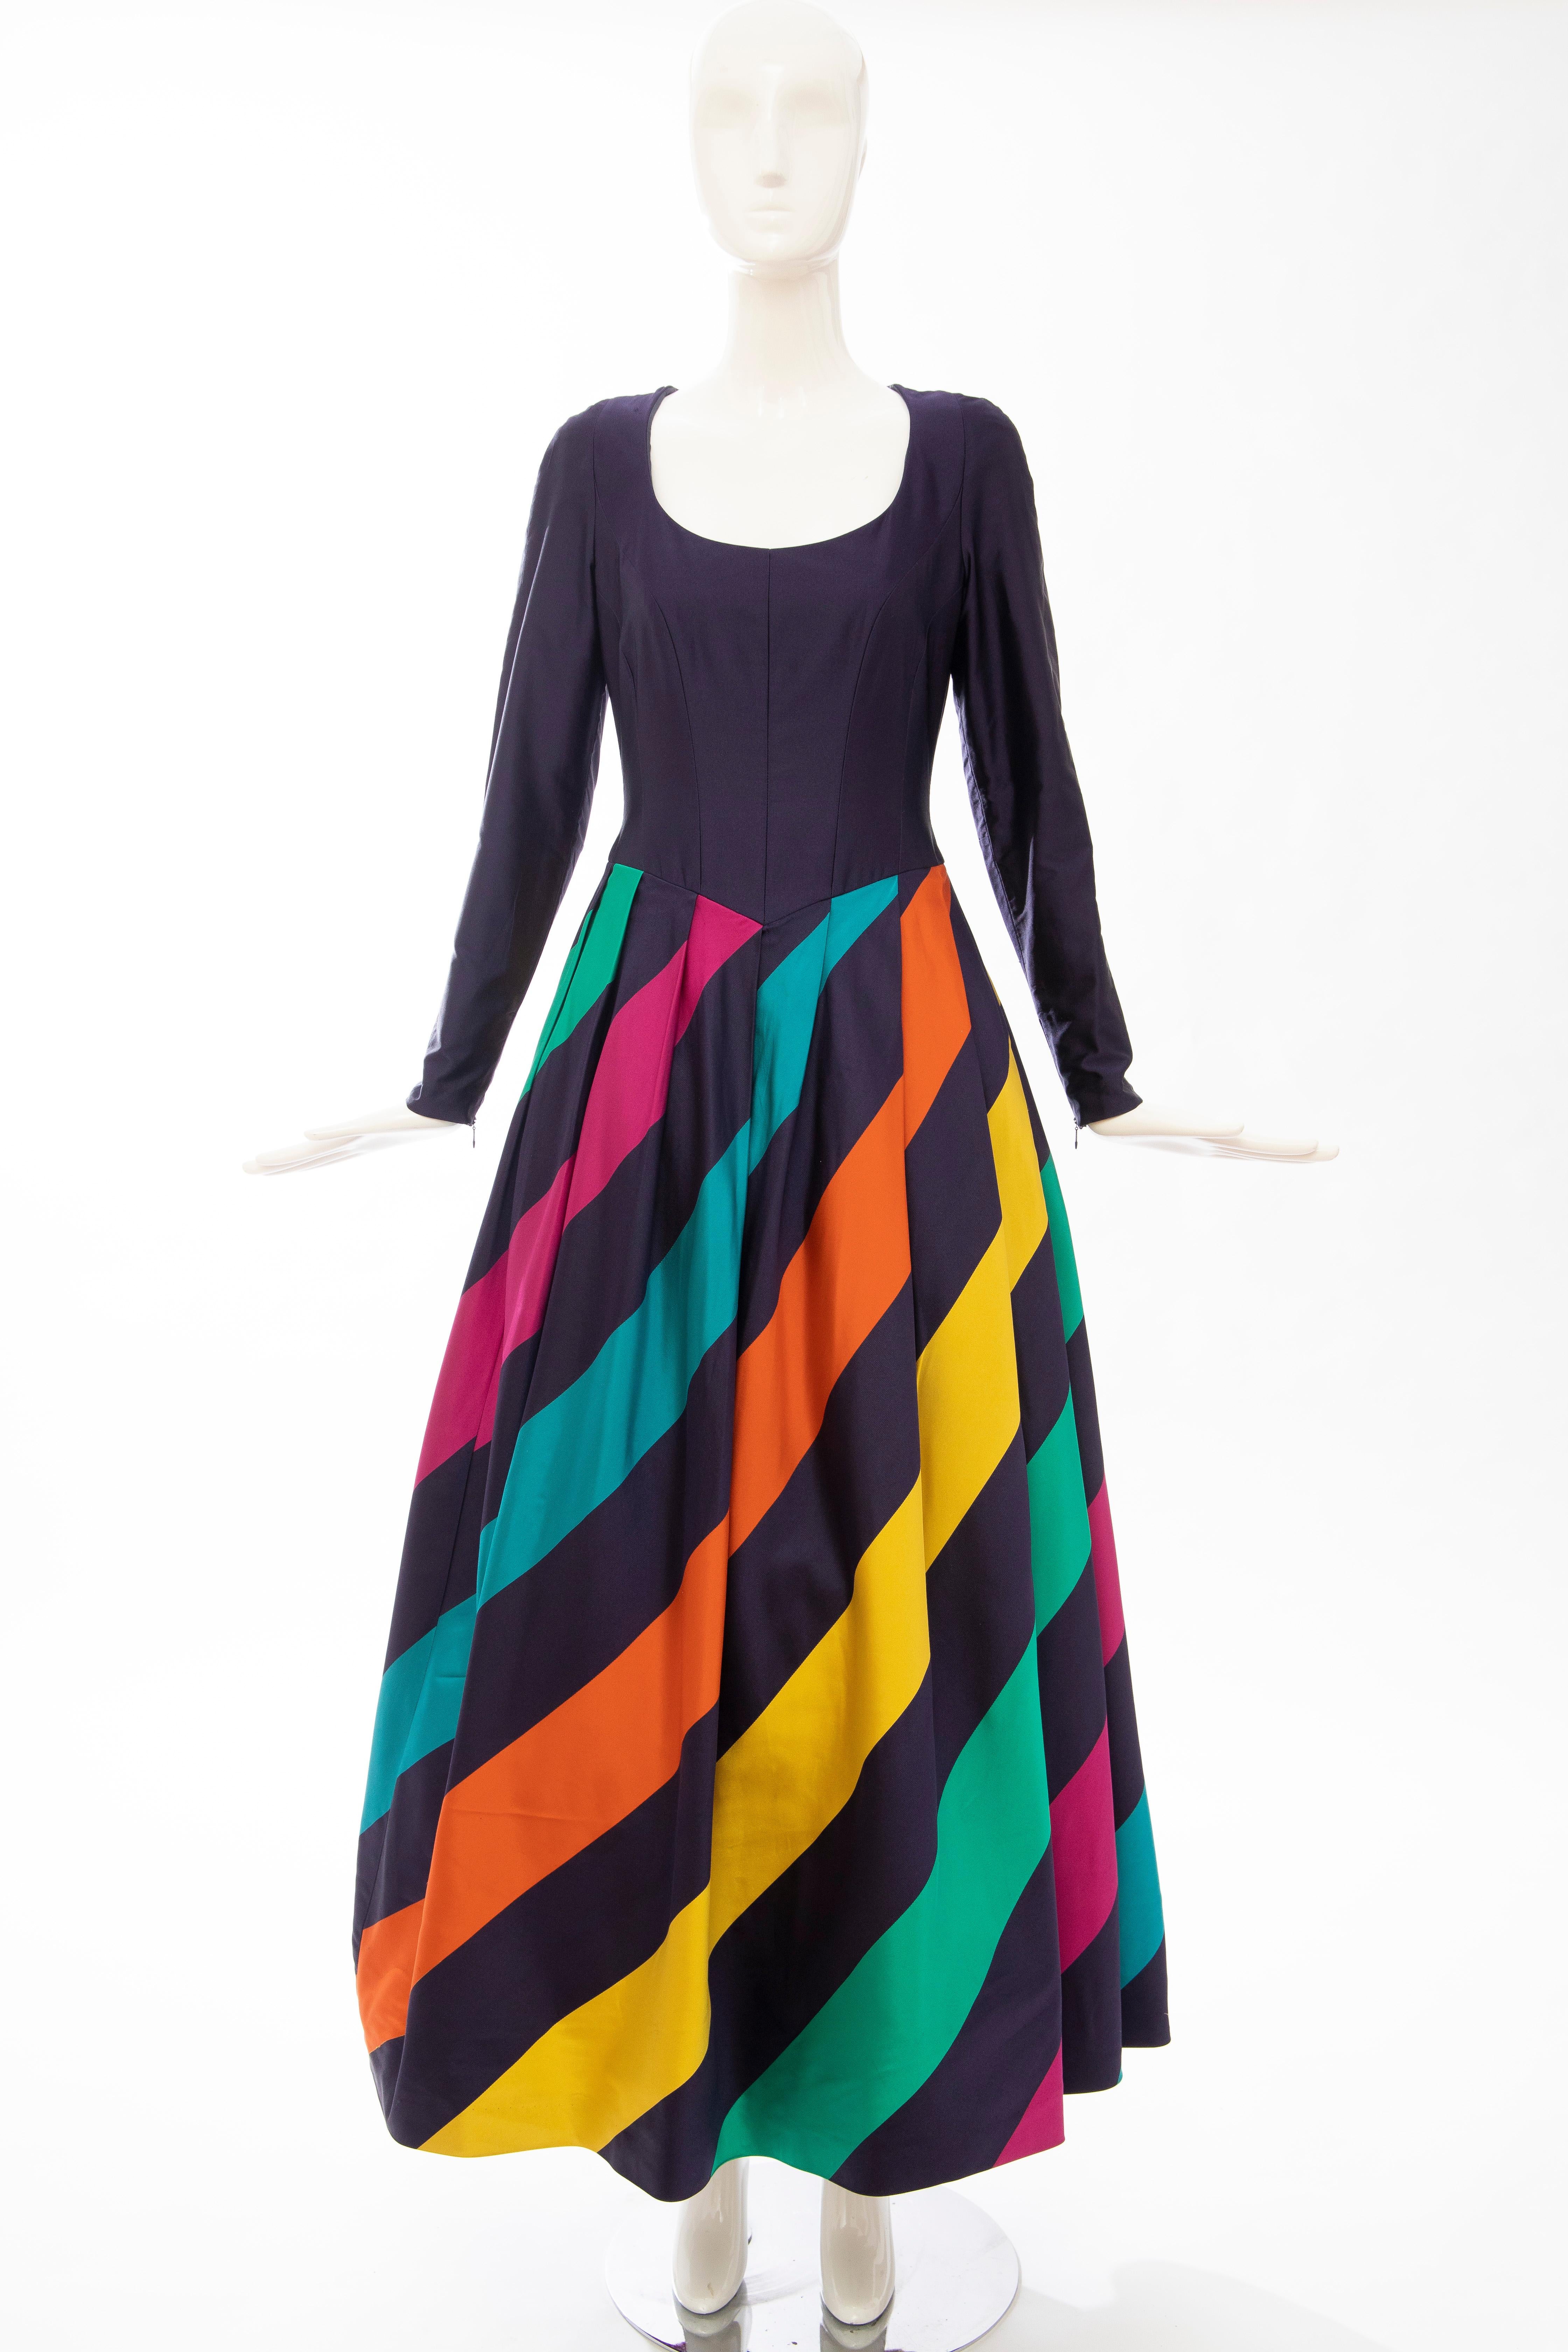 Louis Feraud, Circa: 1980's, silk faille eggplant polychrome striped evening dress, scoop neck, black tulle lining, concealed back zip closure and fully lined in silk.

No Size Label

Bust: 34, Waist: 27, Hip: 38, Length: 56
